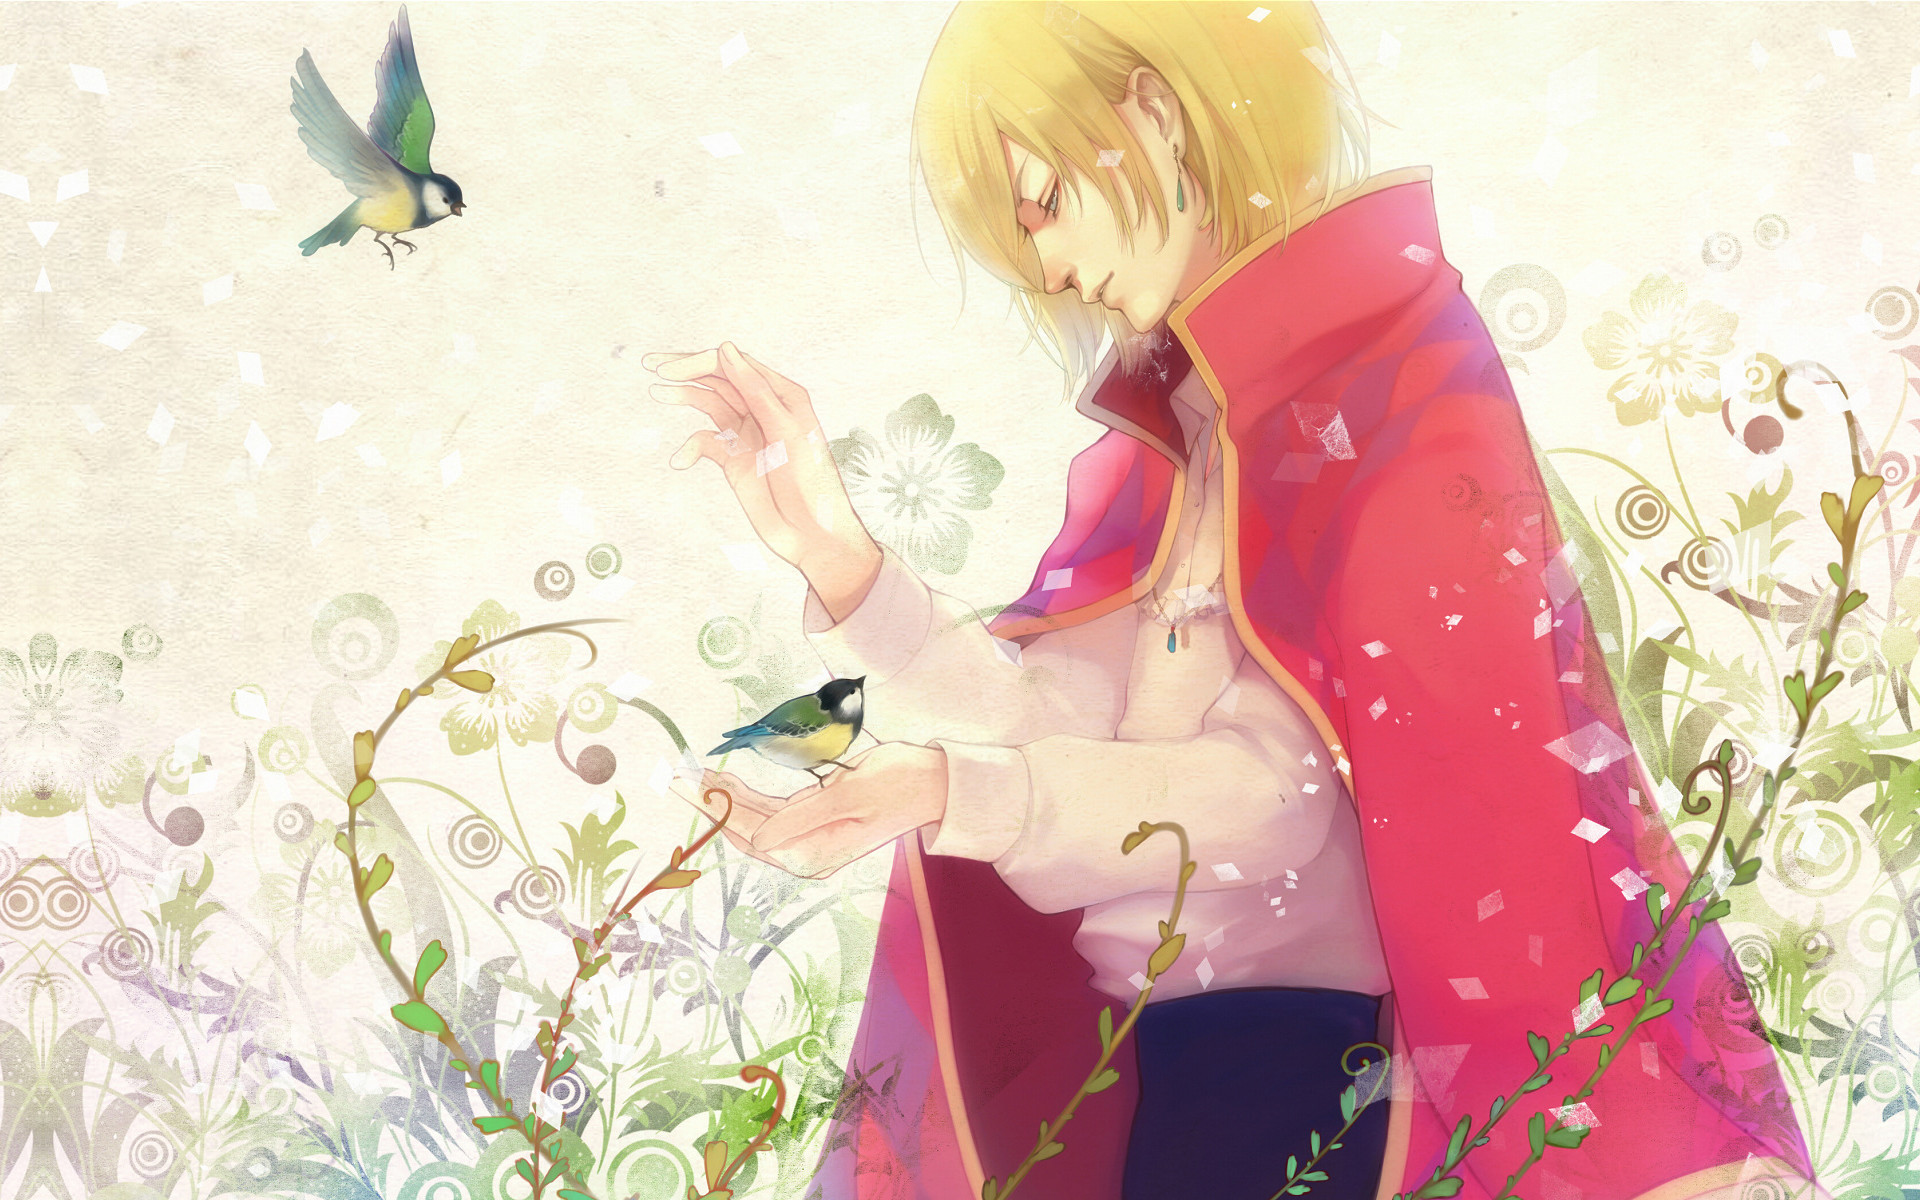 1920x1200 Howl's Moving Castle Wallpaper Widescreen